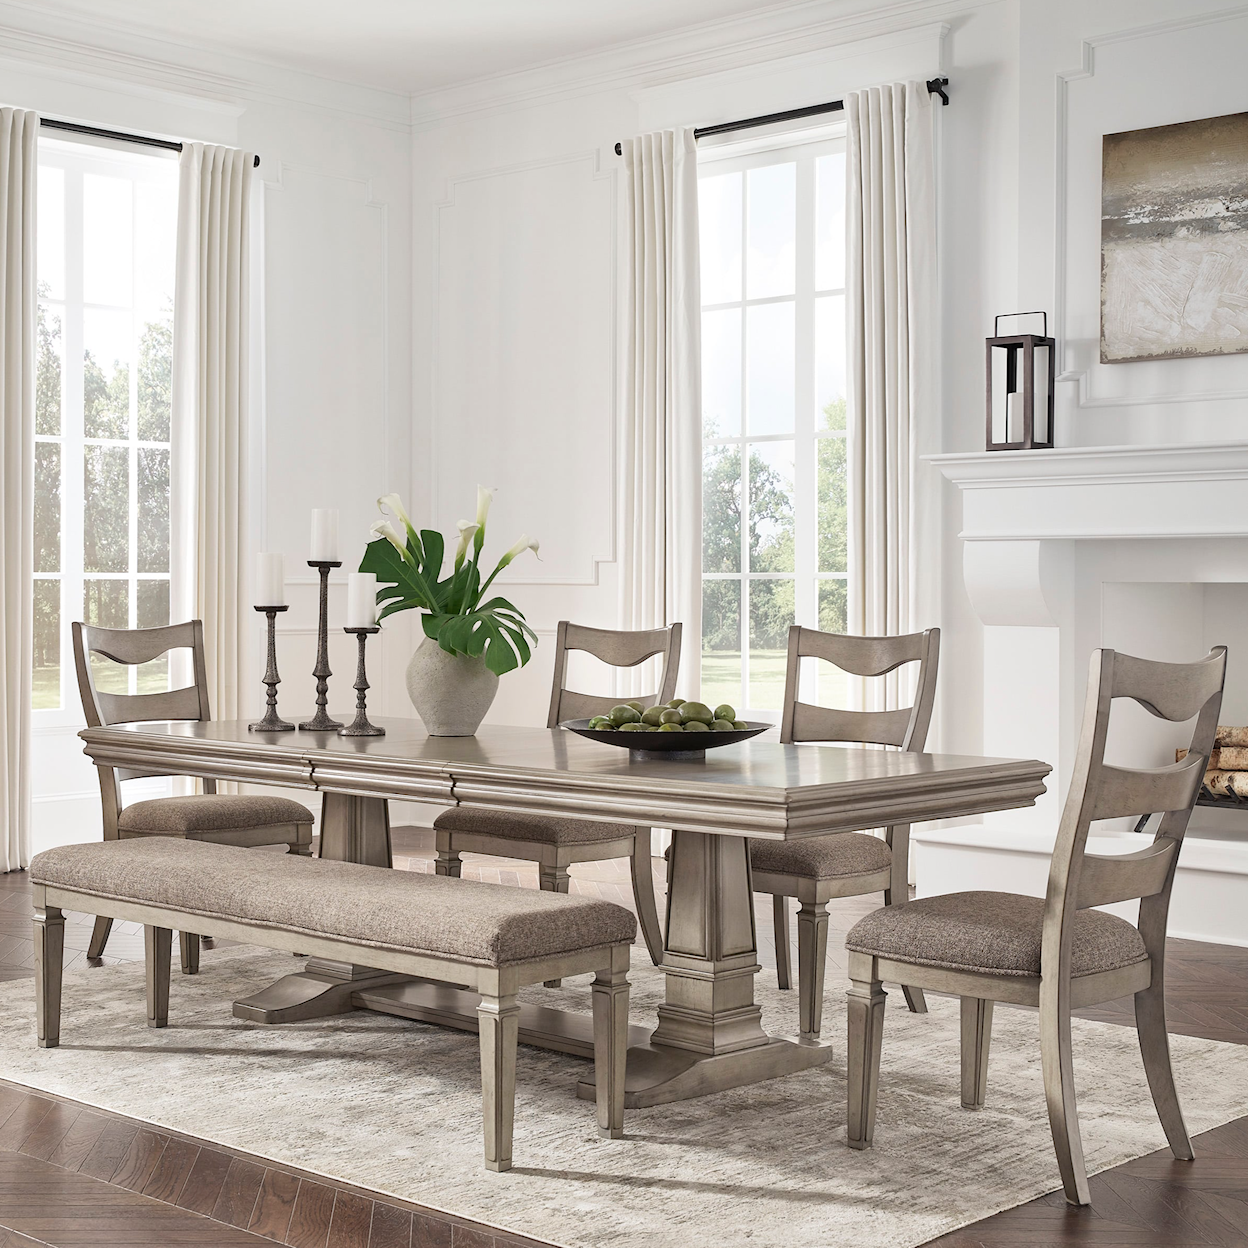 Signature Design by Ashley Lexorne 6-Piece Dining Set with Bench